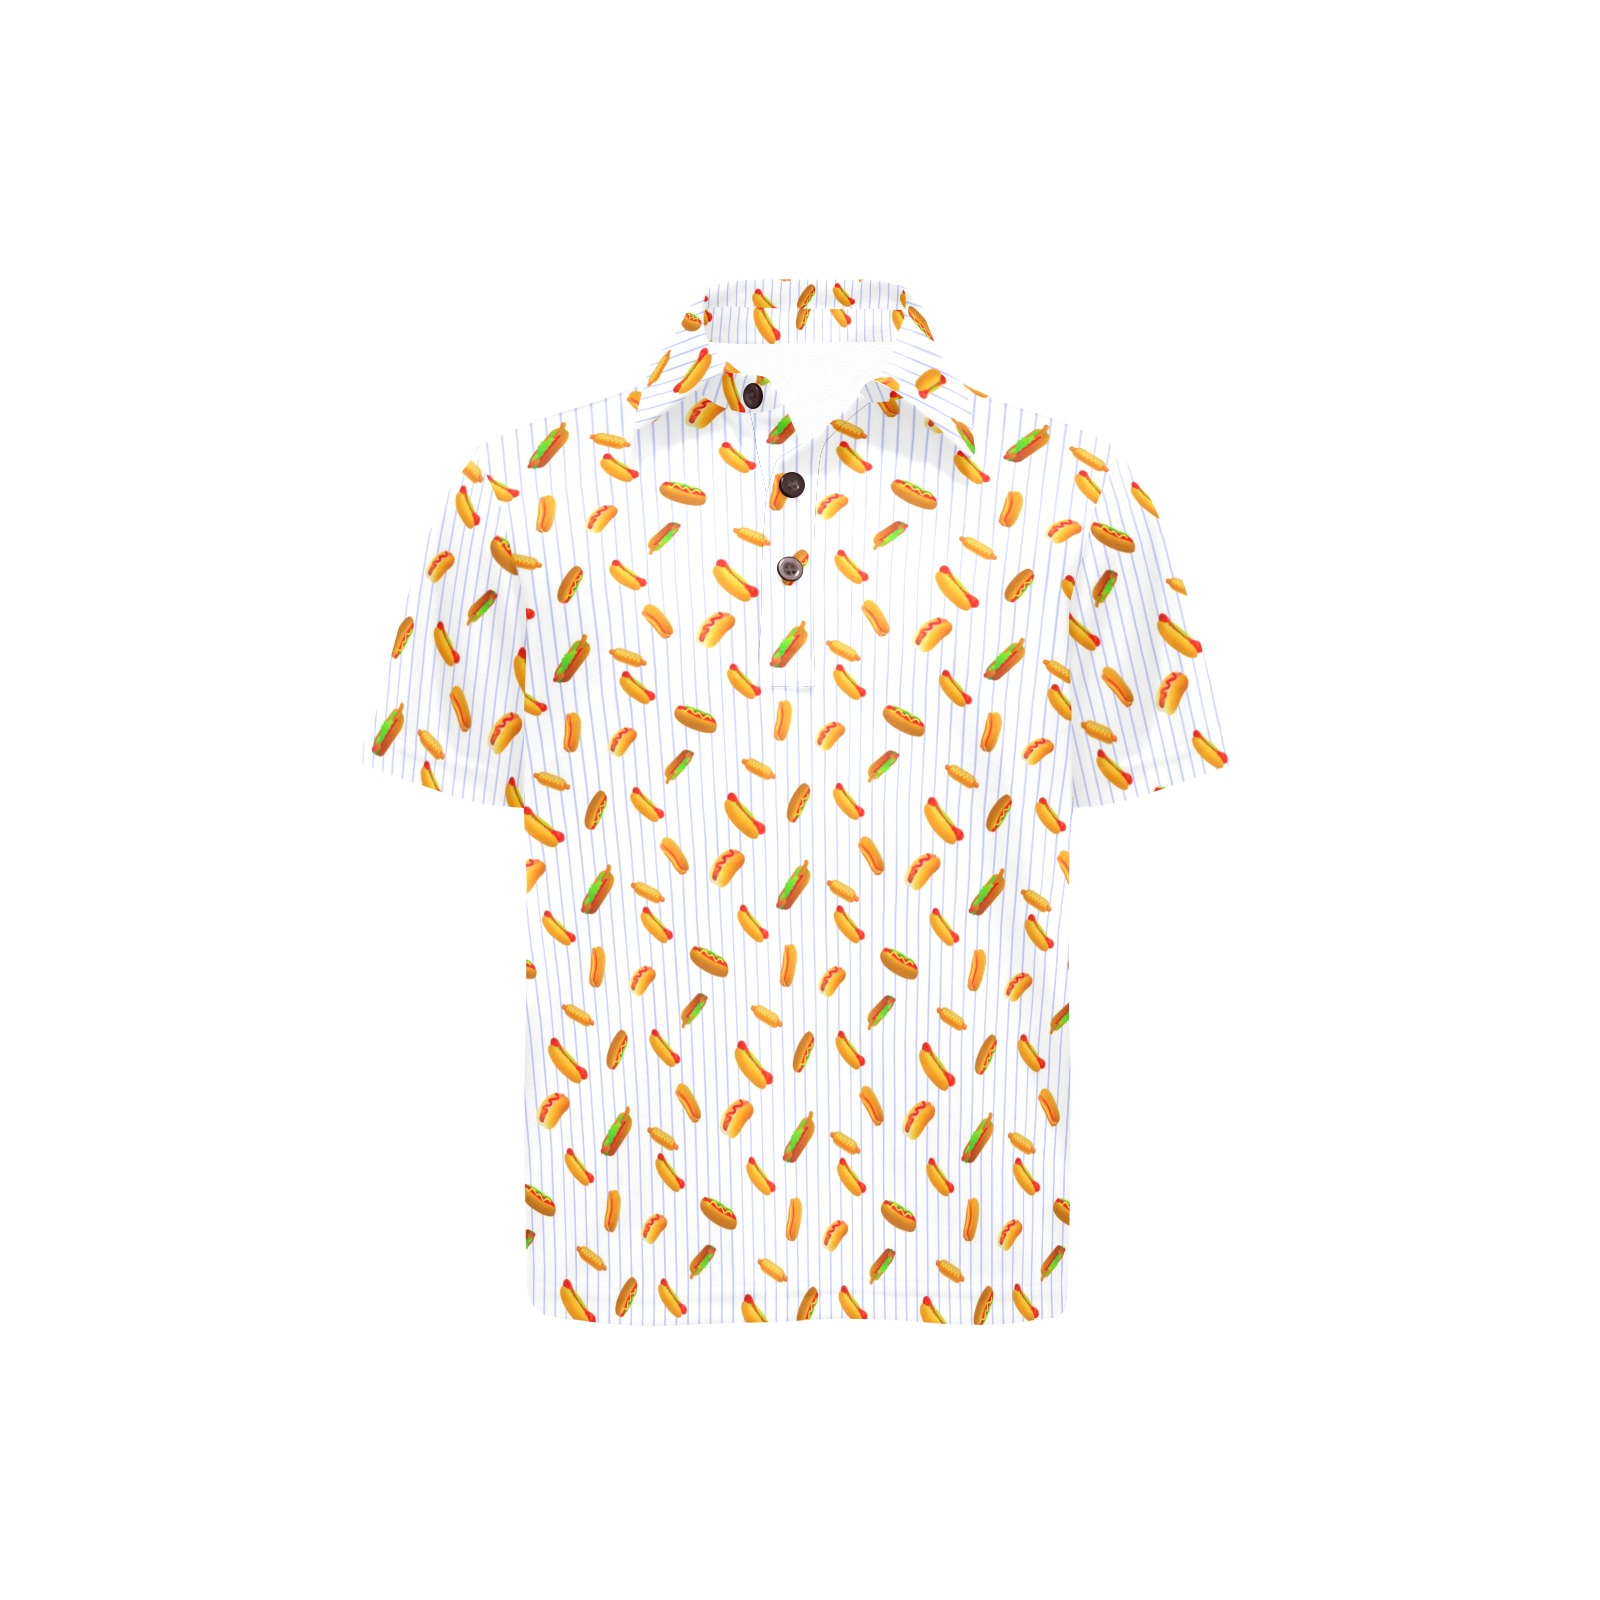 Hot Dog Pattern with Pinstripes Little Girls' All Over Print Polo Shirt (Model T55)